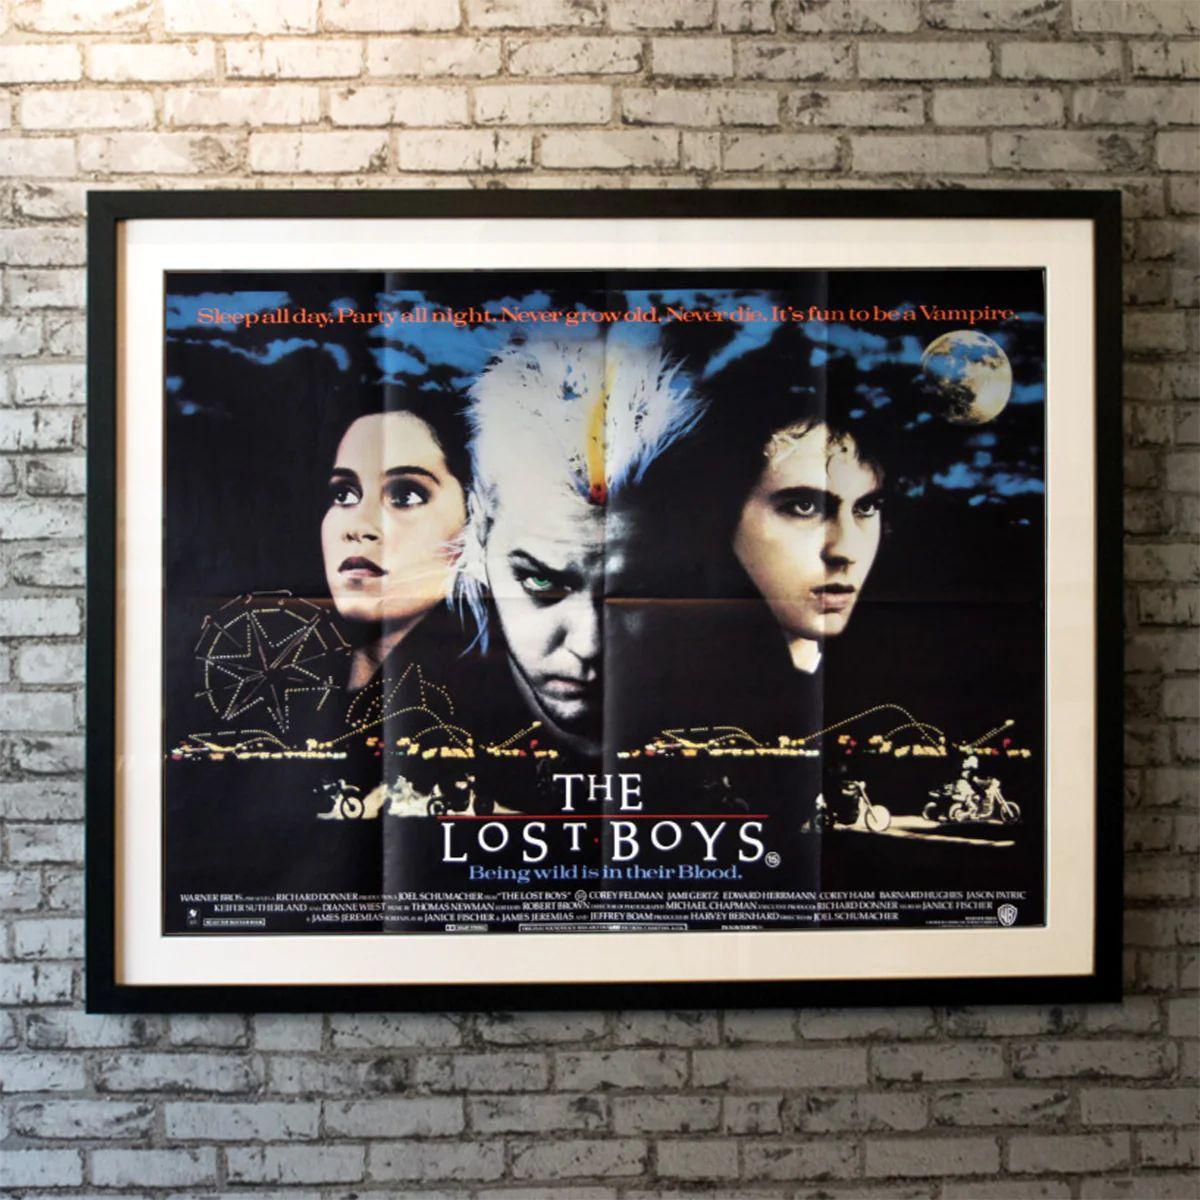 The Lost Boys, Unframed Poster, 1987 

Original British Quad (30 X 40 Inches). After moving to a new town, two brothers discover that the area is a haven for vampires.

Additional Information:
Year: 1987
Nationality: Original British Quad
Condition: